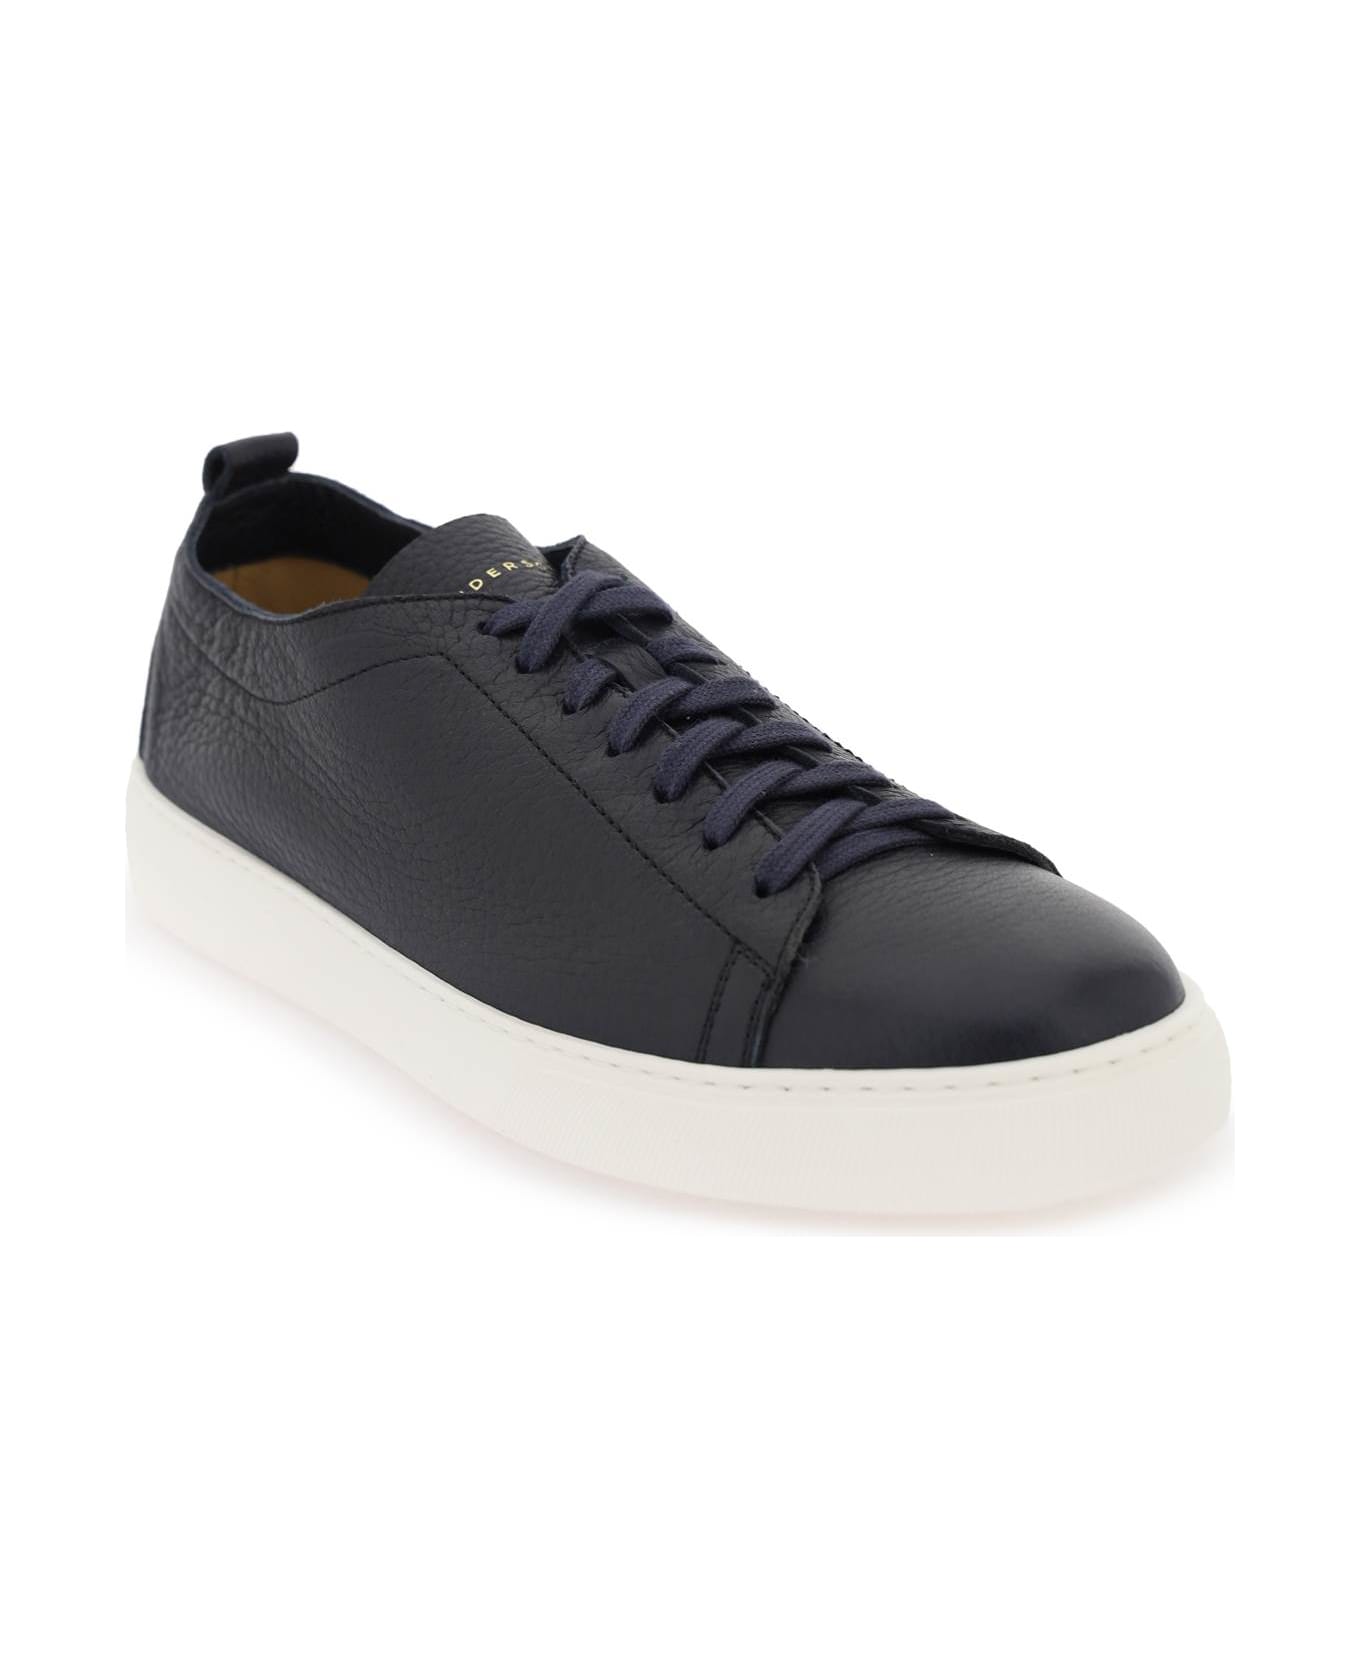 Henderson Baracco Leather Sneakers - BLUE RIVIERA (Blue) スニーカー